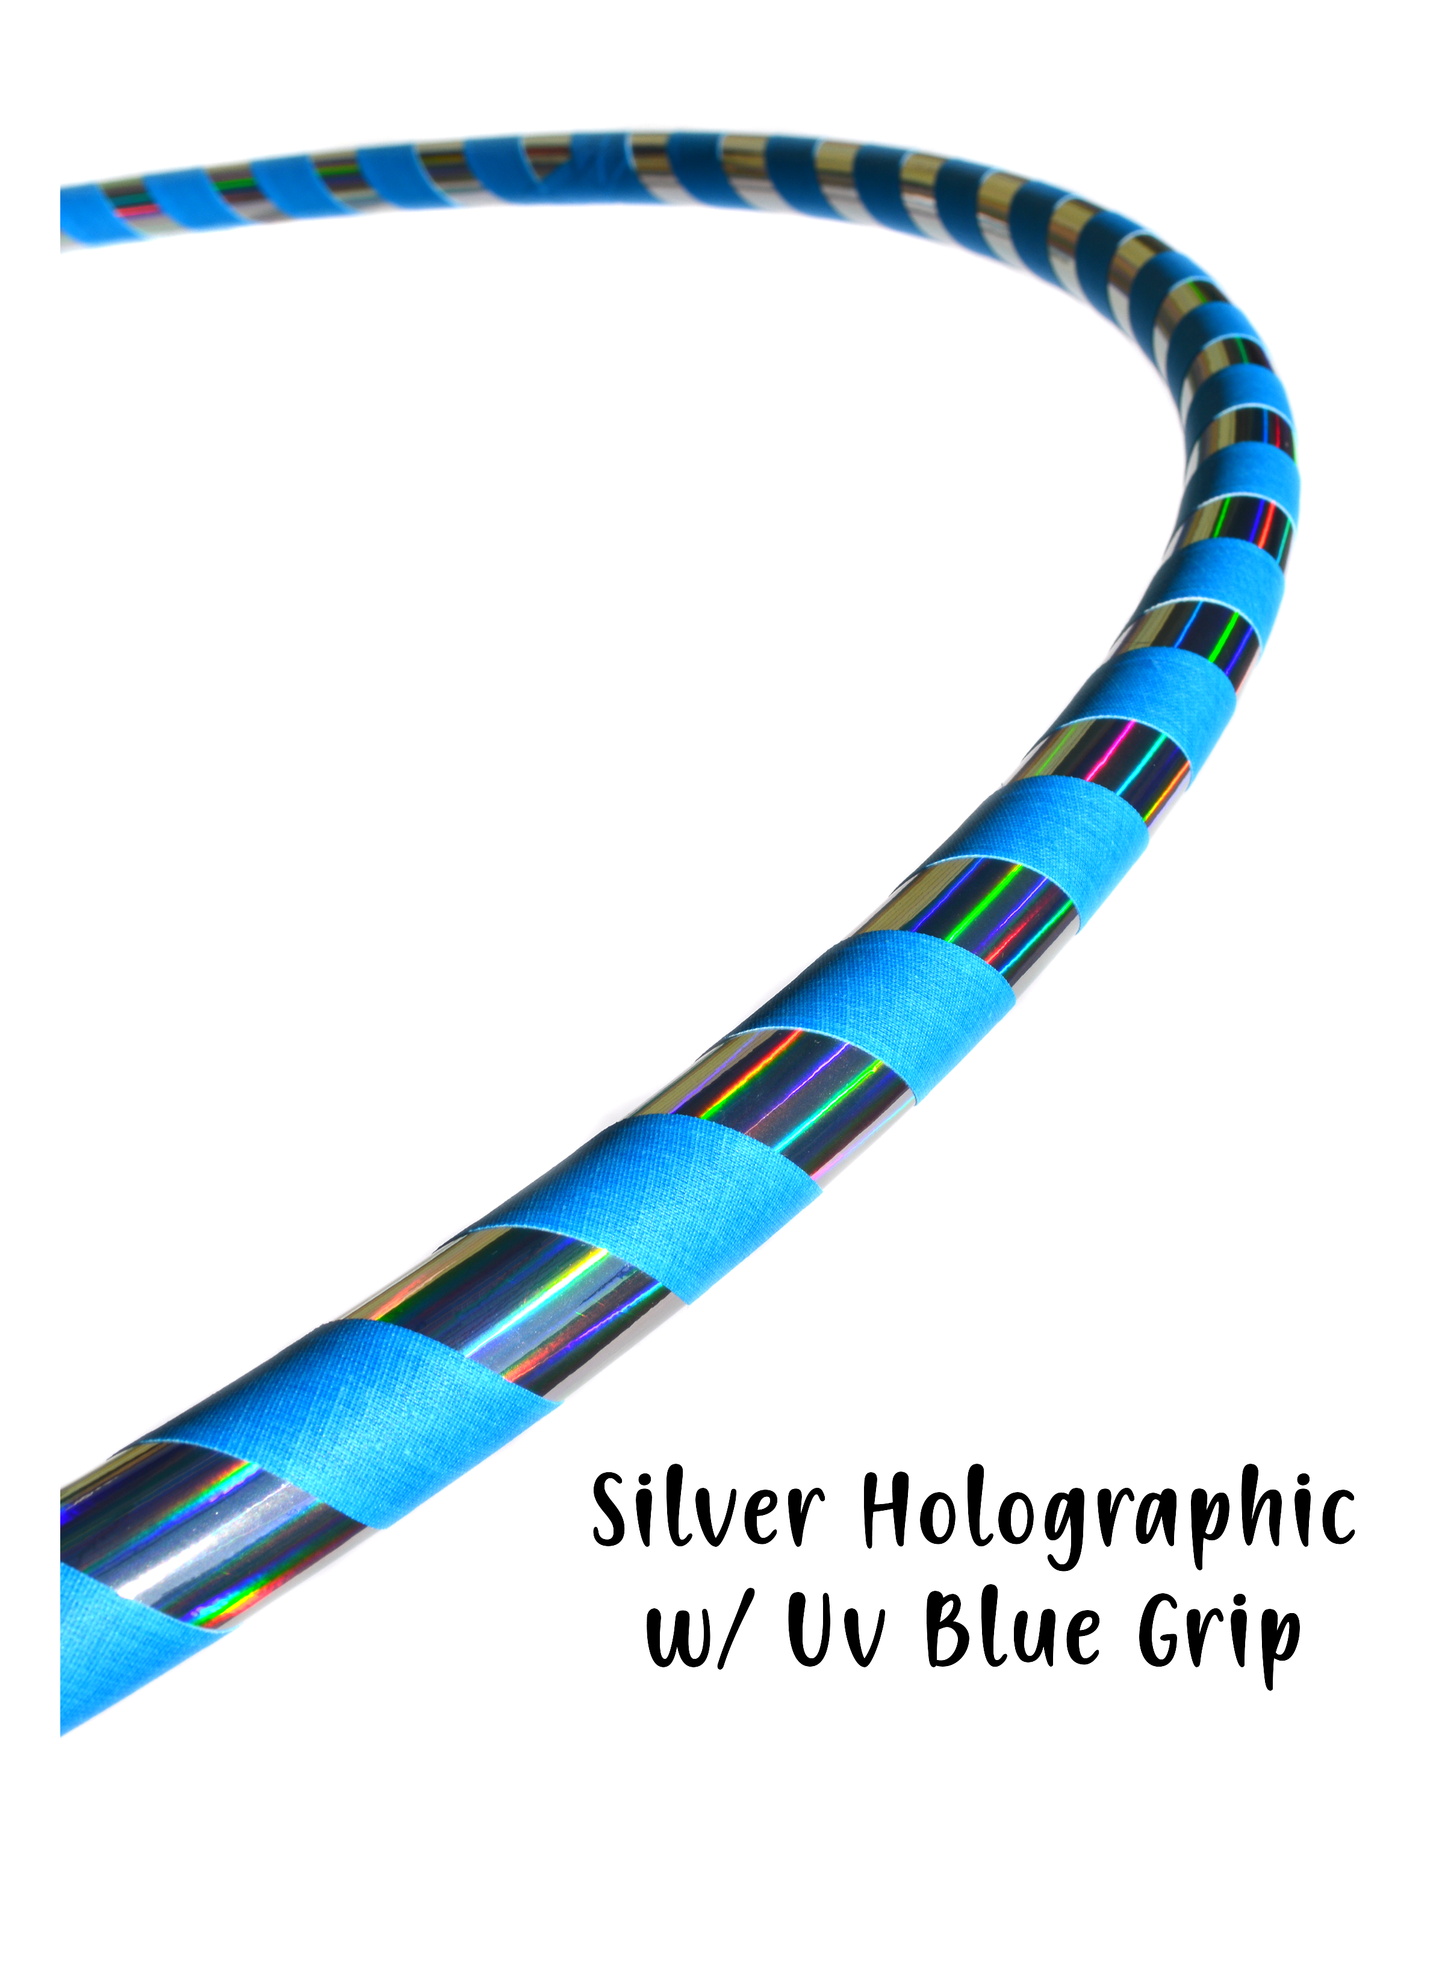 Beginner & Weighted Fitness Taped Beginner Hula Hoops | Mirror, Holographic, & Prism Deco Tapes + Gaffer Grip Tape